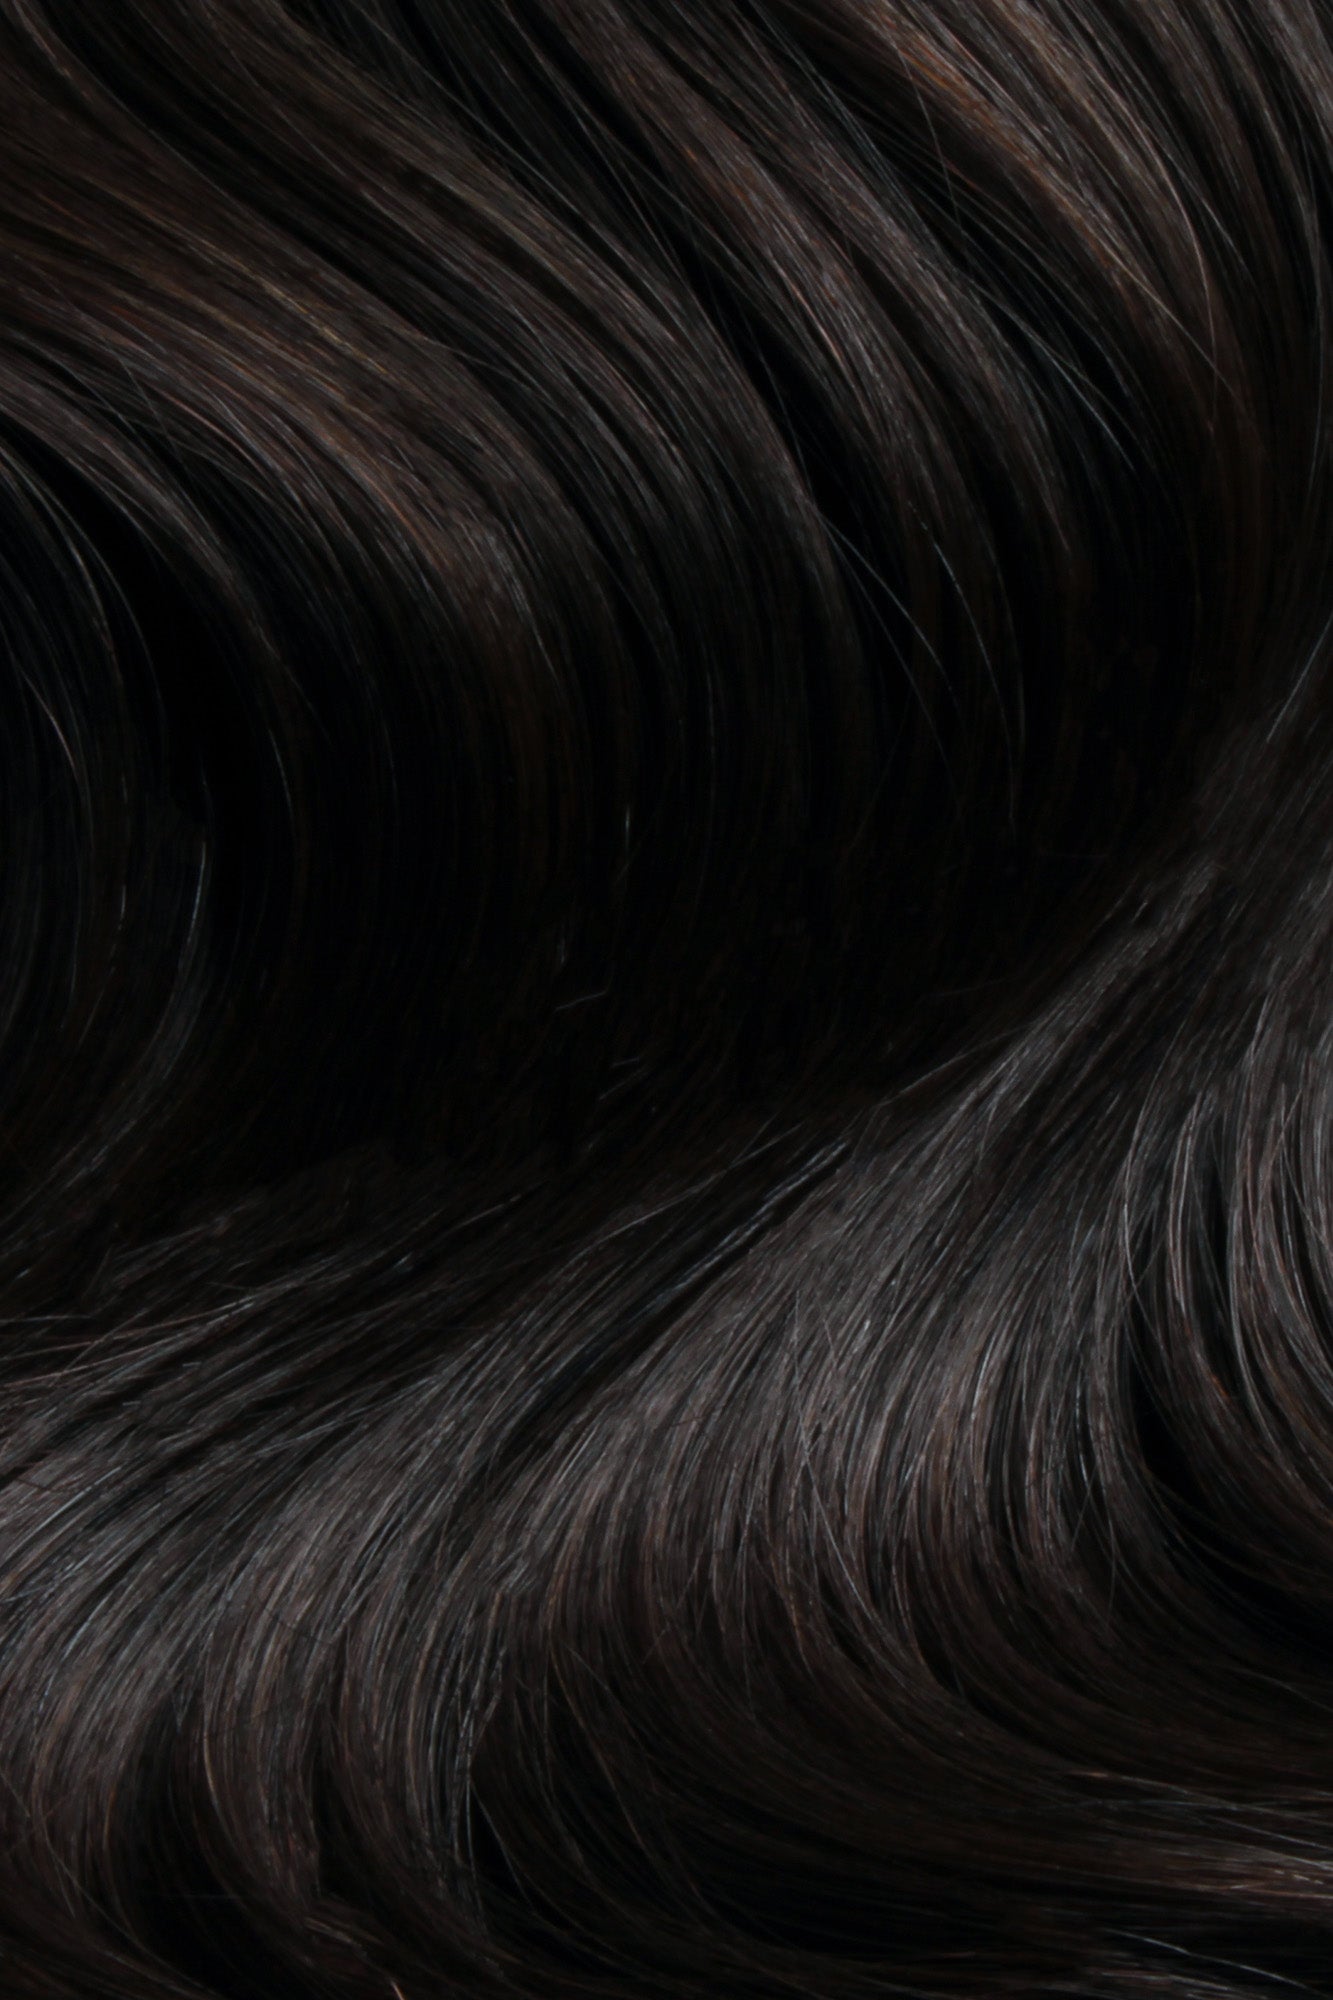 Nano Bonds 24 Inches - SWAY Hair Extensions Natural-Black-1B Ultra-fine, invisible bonds for a flawless, natural look. 100% Remy Human hair, lightweight and versatile. Reusable and perfect for individual or salon use.